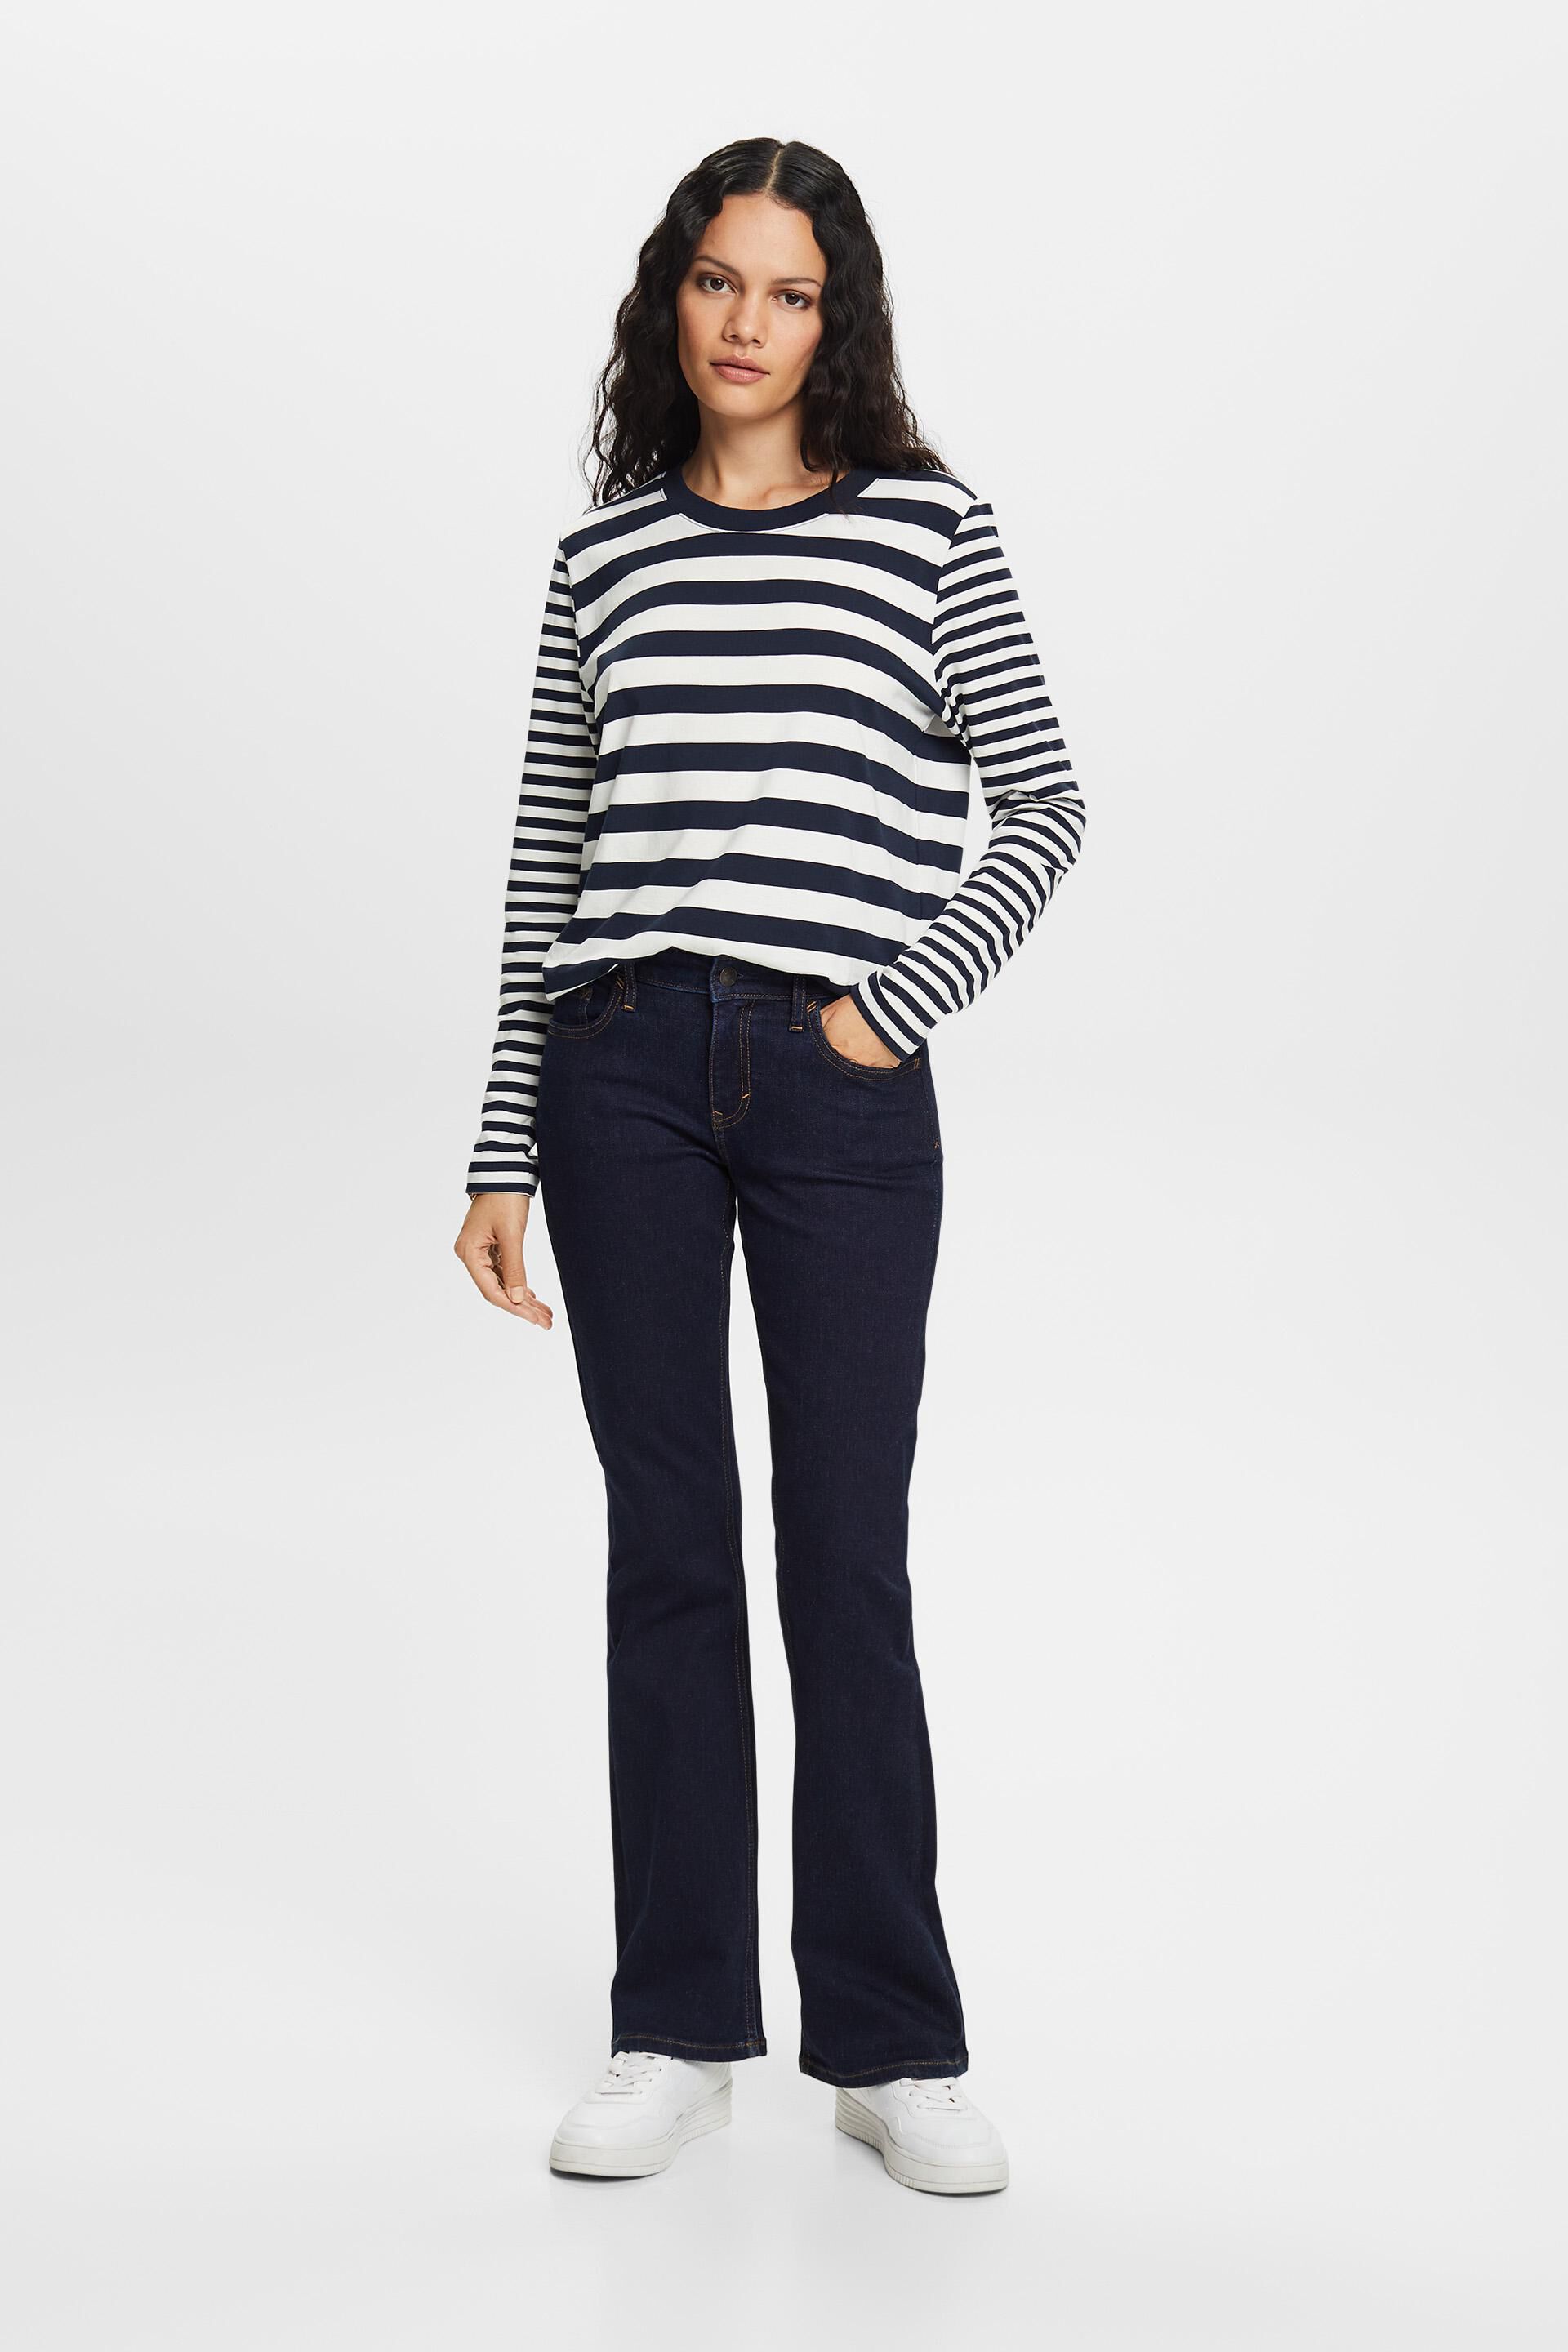 Shop the Latest in Women\'s Fashion Mid-Rise Bootcut Jeans | ESPRIT Hong  Kong Official Online Store